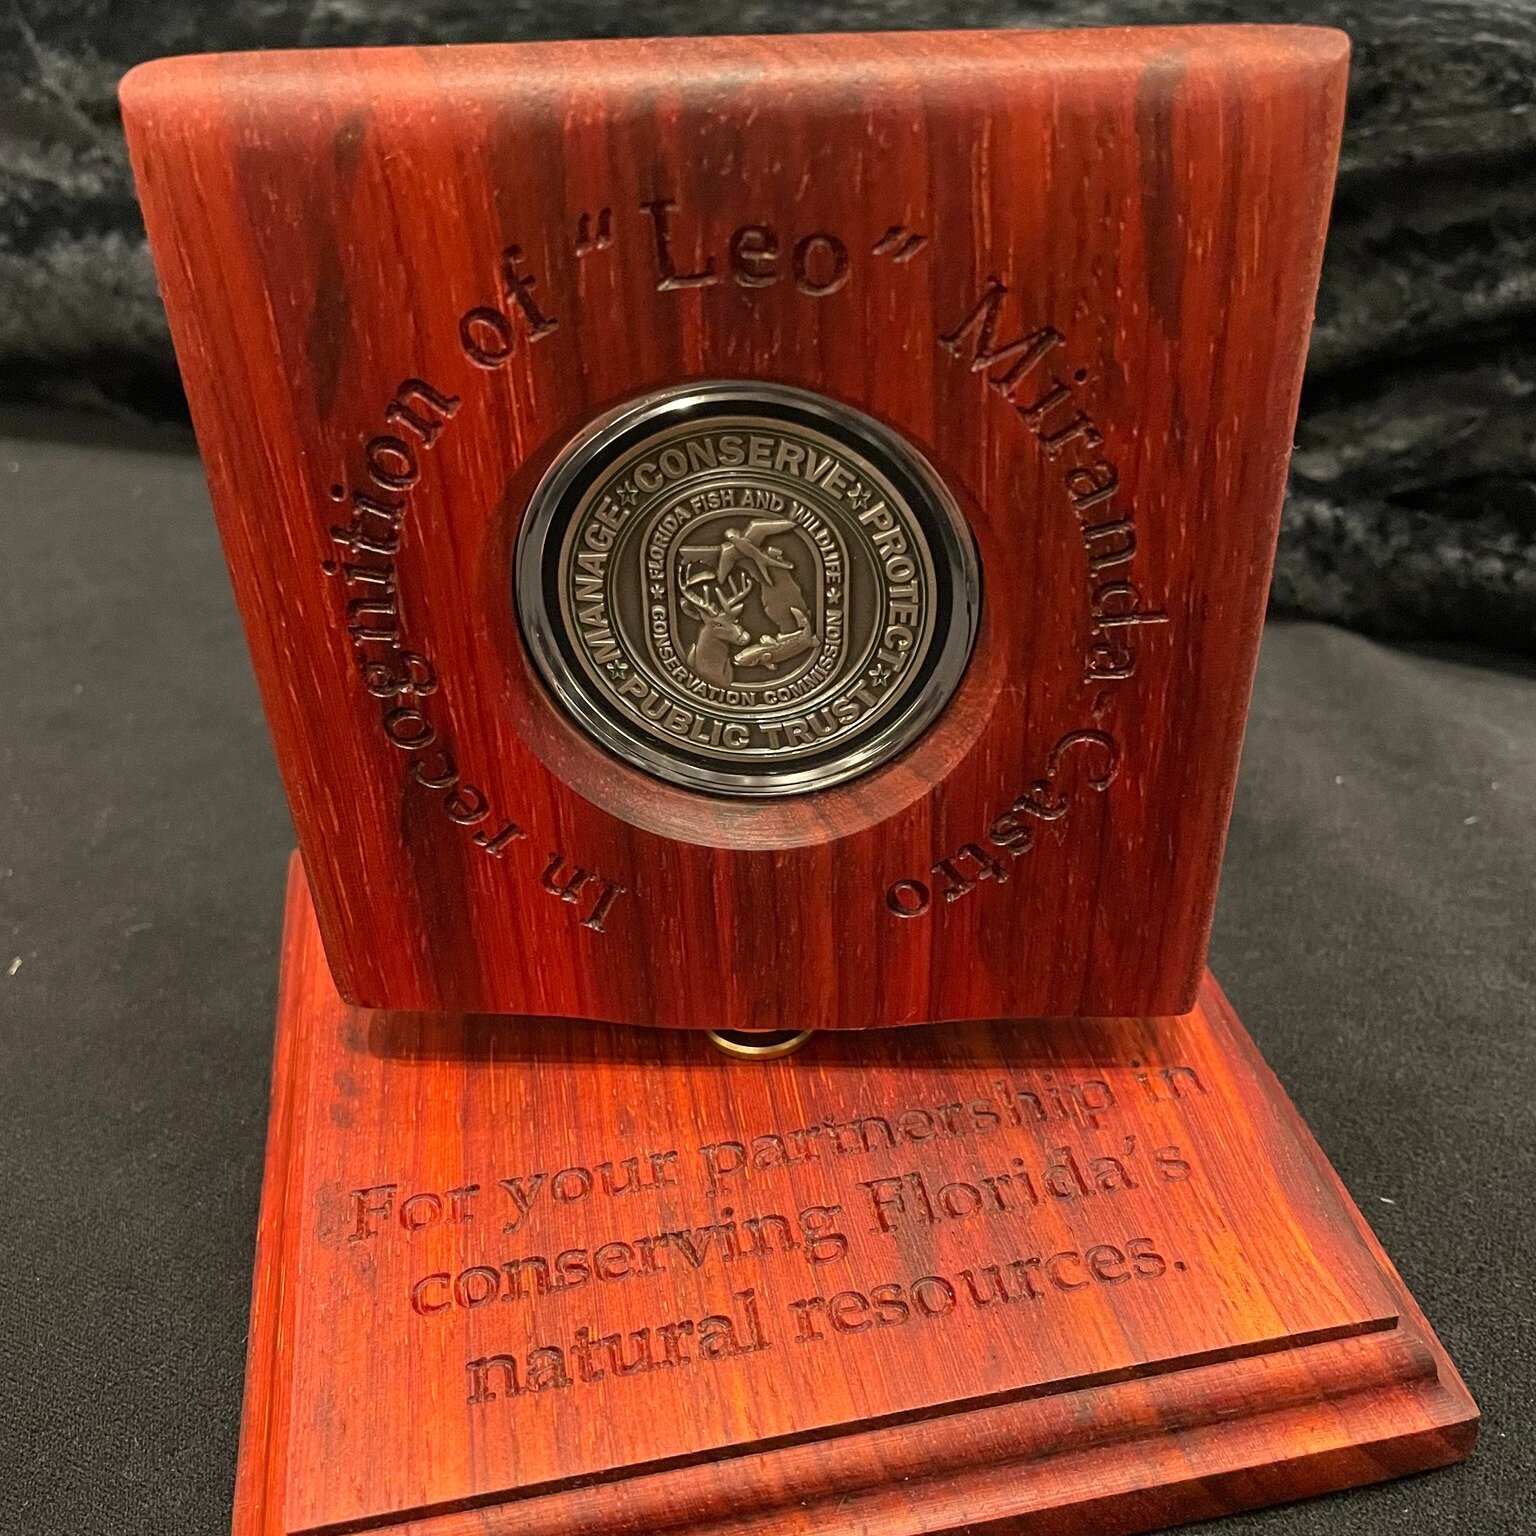 This photo sent in by one of our customers, @myfwc is a custom display made out of African Padauk with an engraving encircling the coin as well as on the base.
.
.
.
#MyFWC #Florida #FishandWildlife #coindisplays #recognition #beworthyofrecognition #